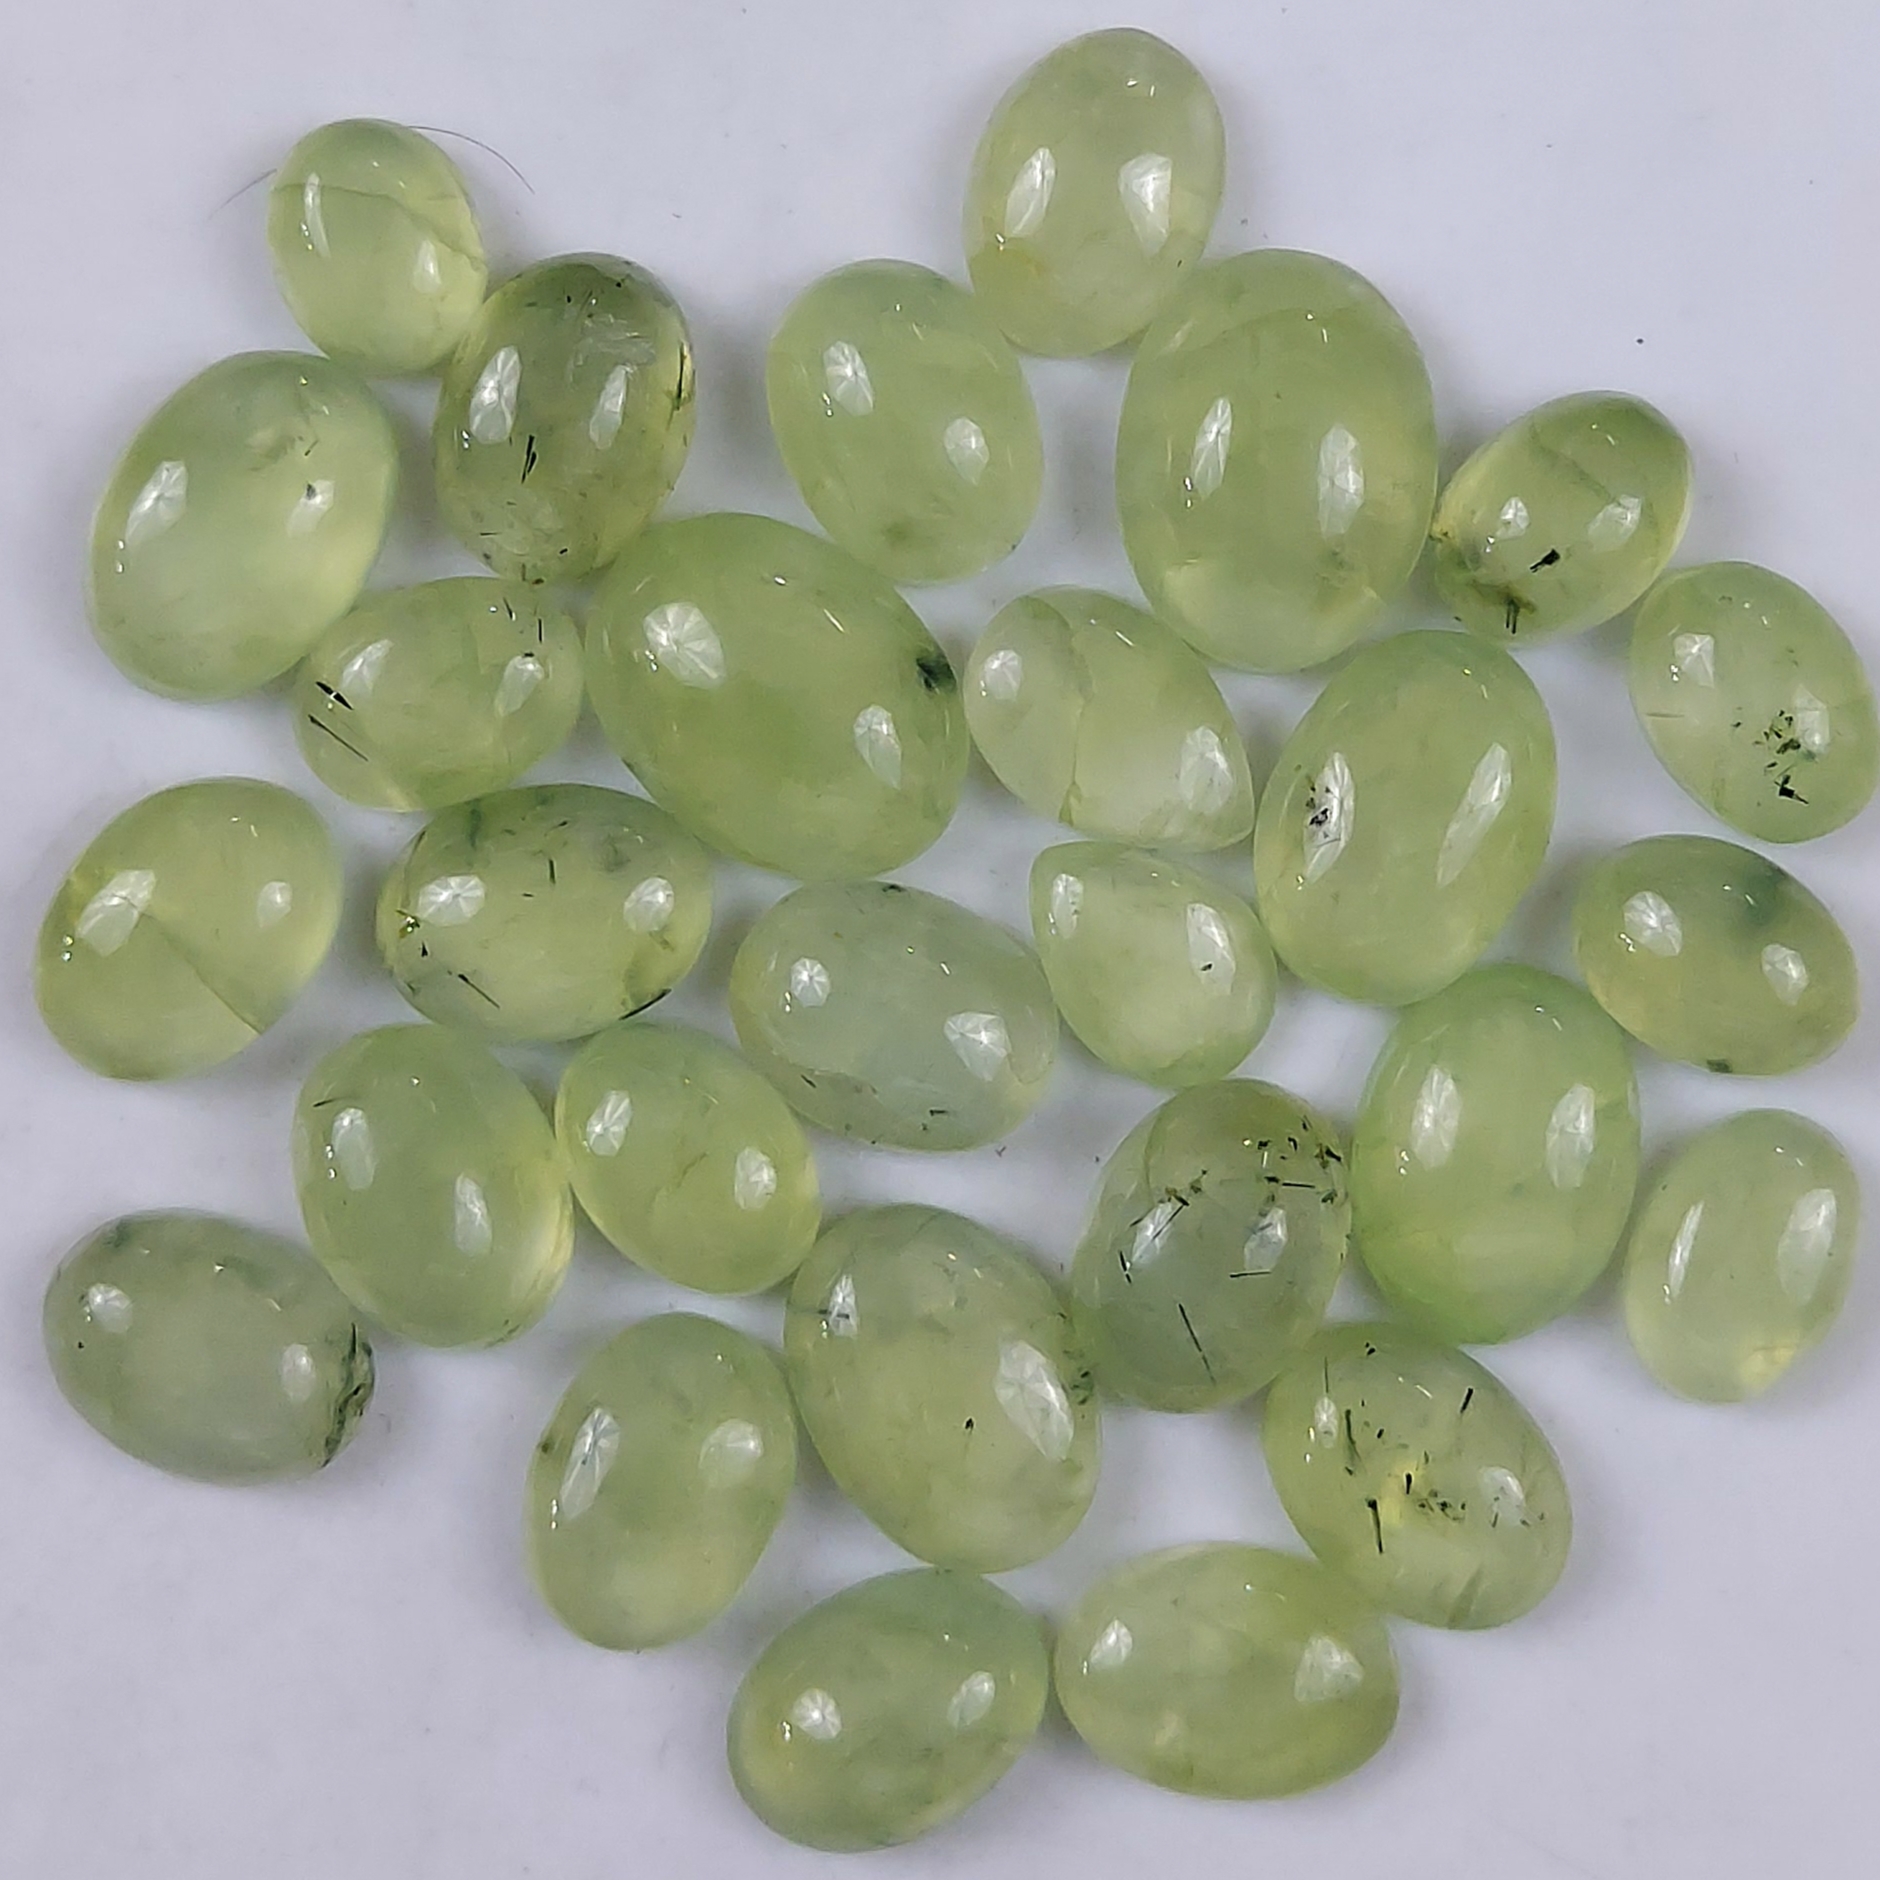 28Pcs 307Cts Natural Green Prehnite Loose Cabochon Gemstone Lot For Jewelry Making  17x13 11x7mm#1244